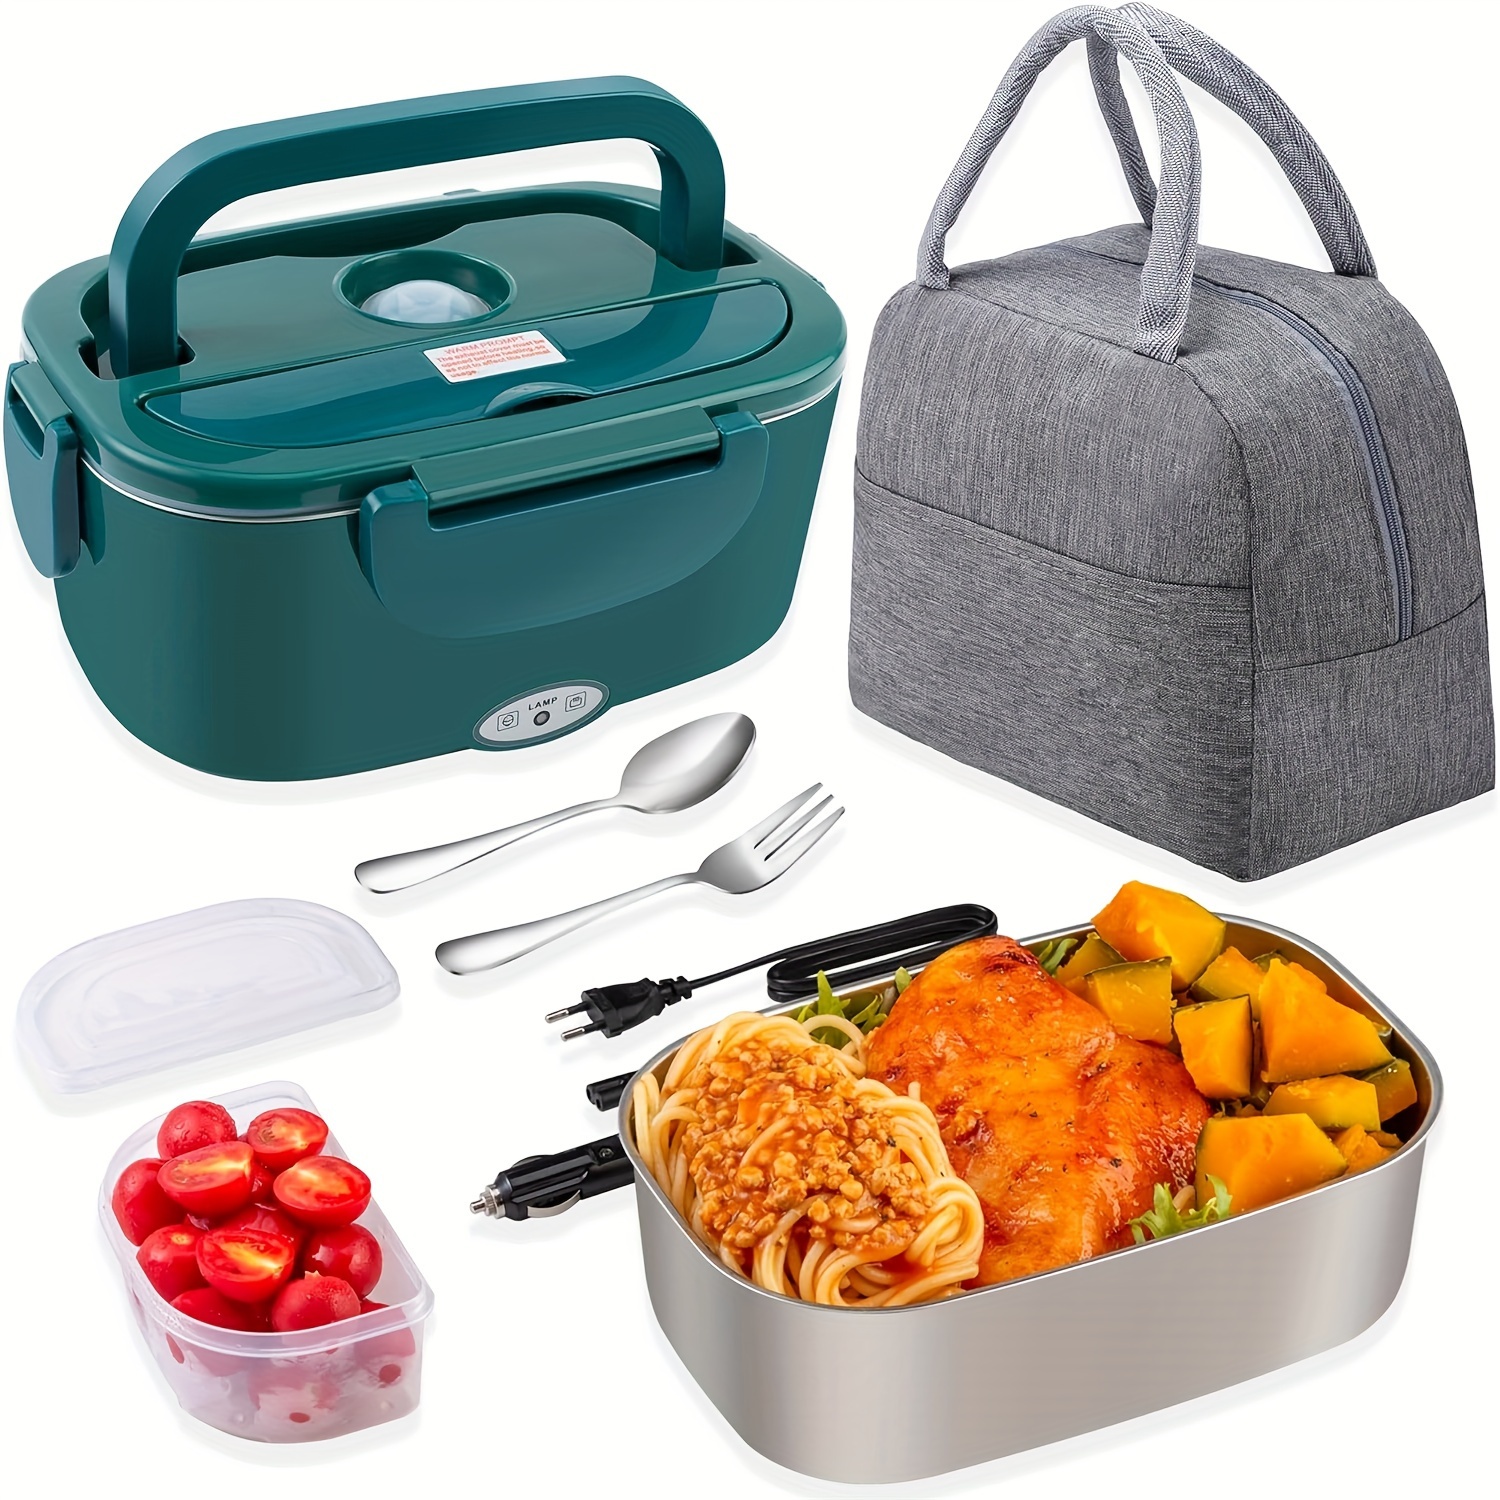 

80w 1.5 Liter Adult Electric Lunch Box, Portable, For Men, For Heating Food 12/24/110v, For Car/truck, With Insulated Bag, Plastic Case, Spoon, Fork (green)